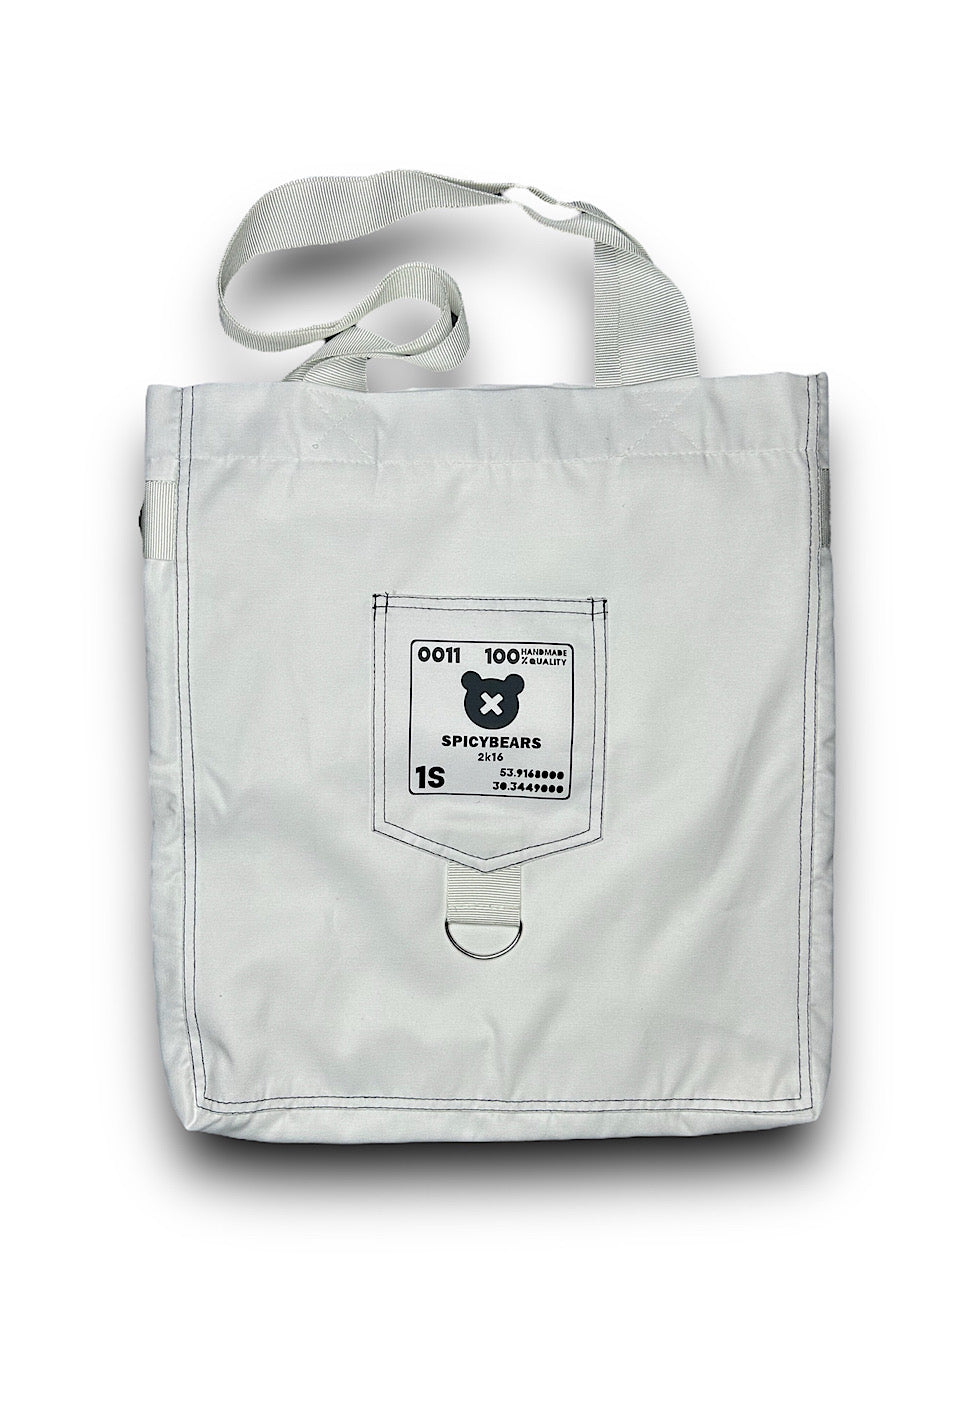 SPICYBEARS Logo Tote | White | Black Reflective - SPICYBEARS